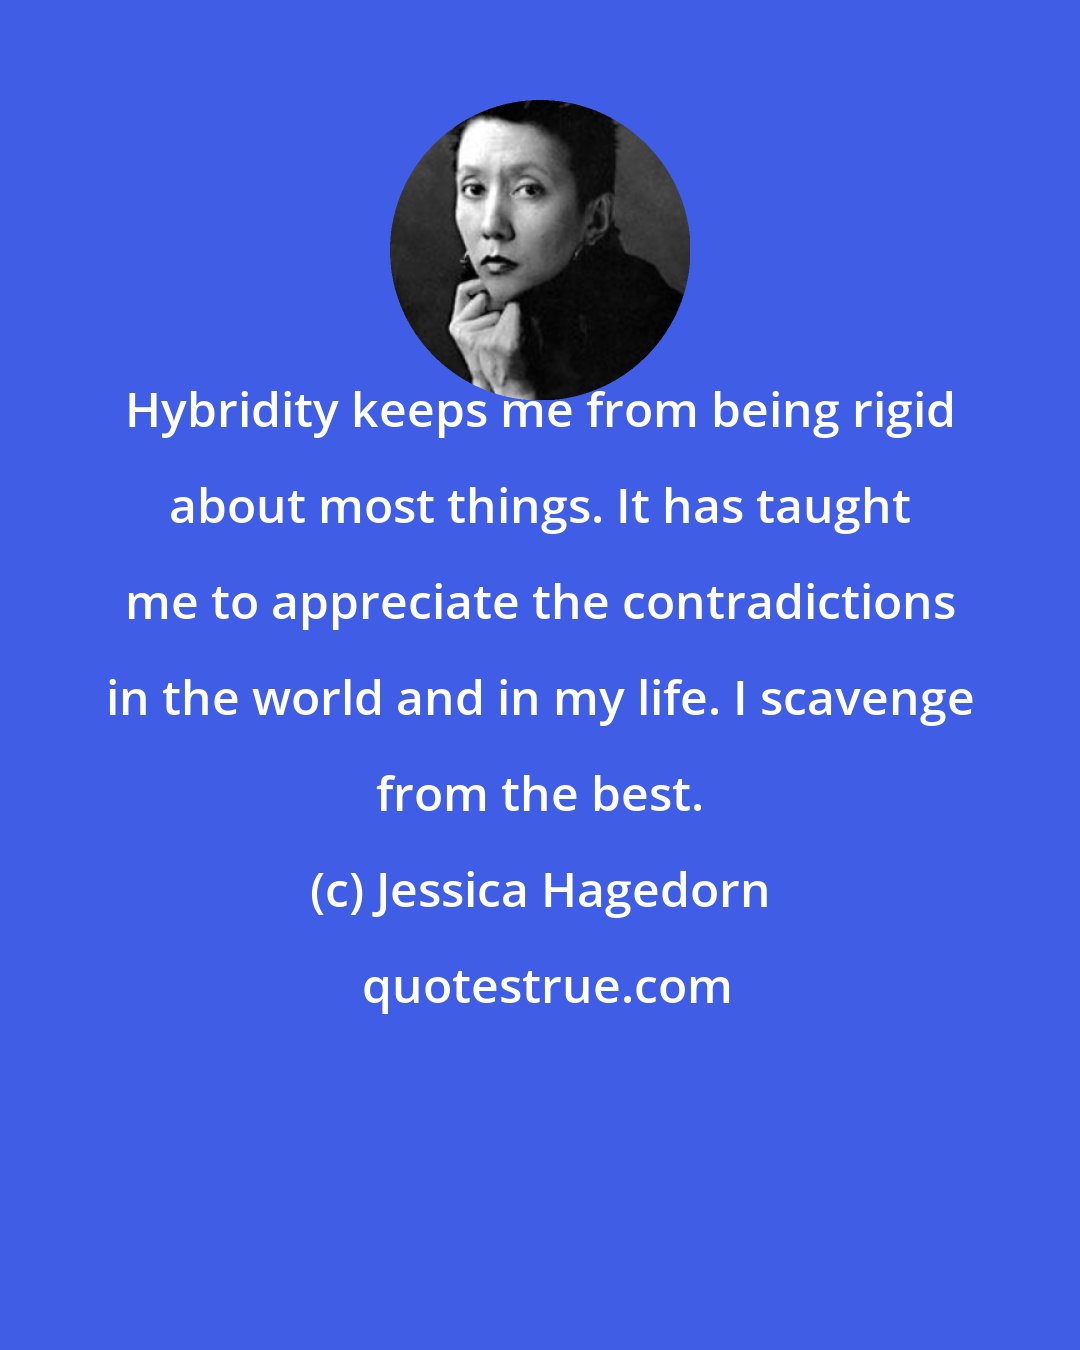 Jessica Hagedorn: Hybridity keeps me from being rigid about most things. It has taught me to appreciate the contradictions in the world and in my life. I scavenge from the best.